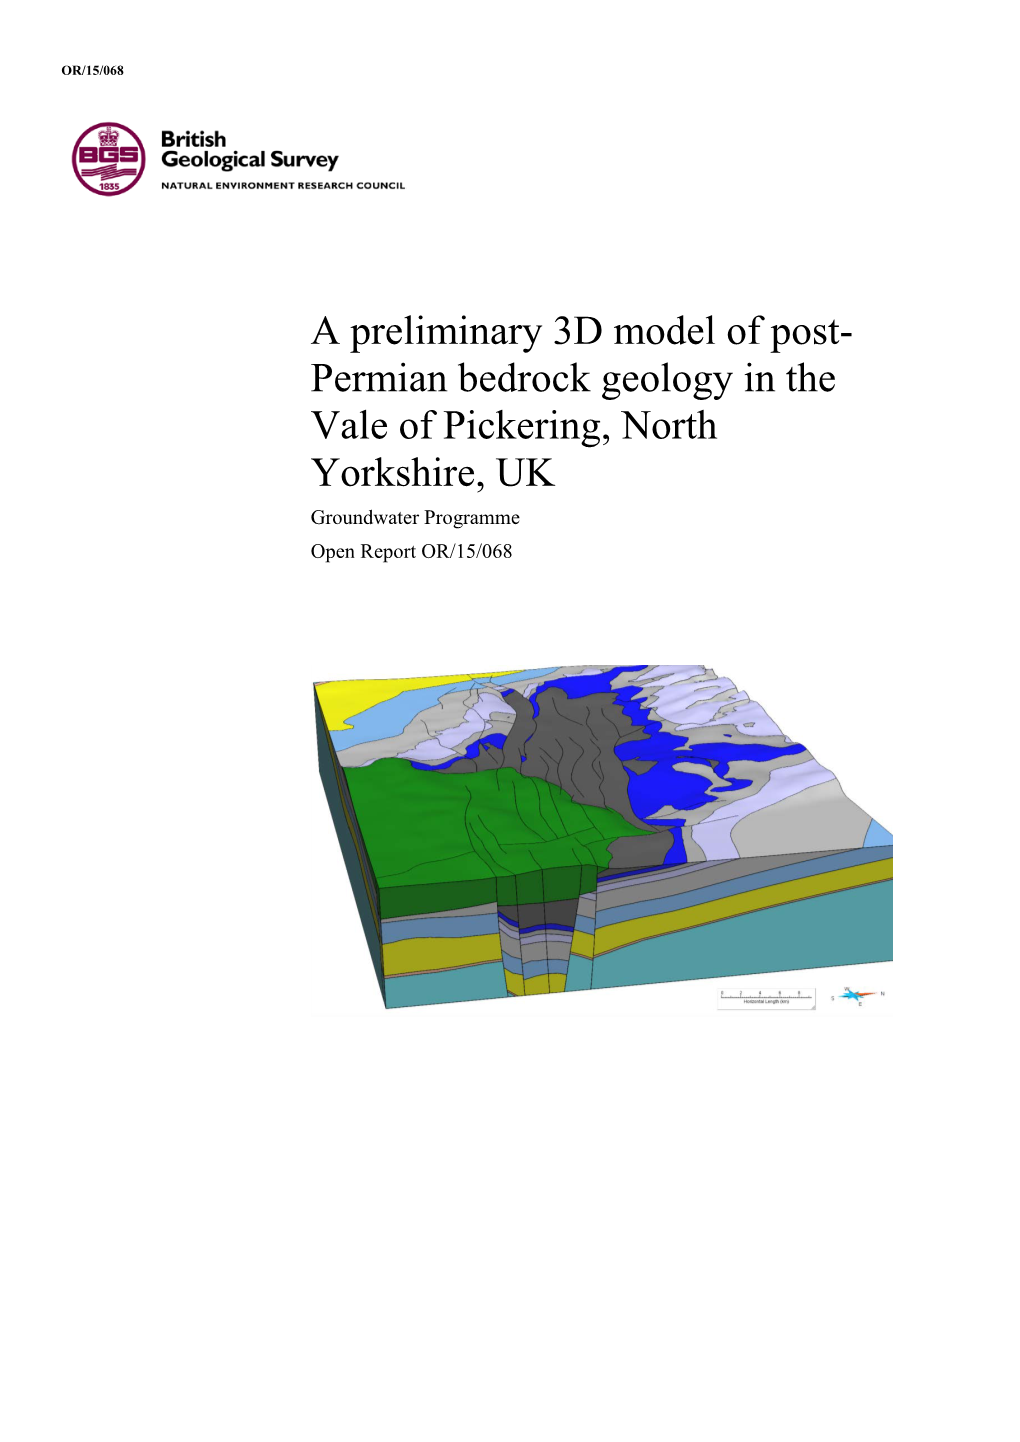 A Preliminary 3D Model of Post-Permian Bedrock Geology in the Vale of Pickering, North Yorkshire, UK